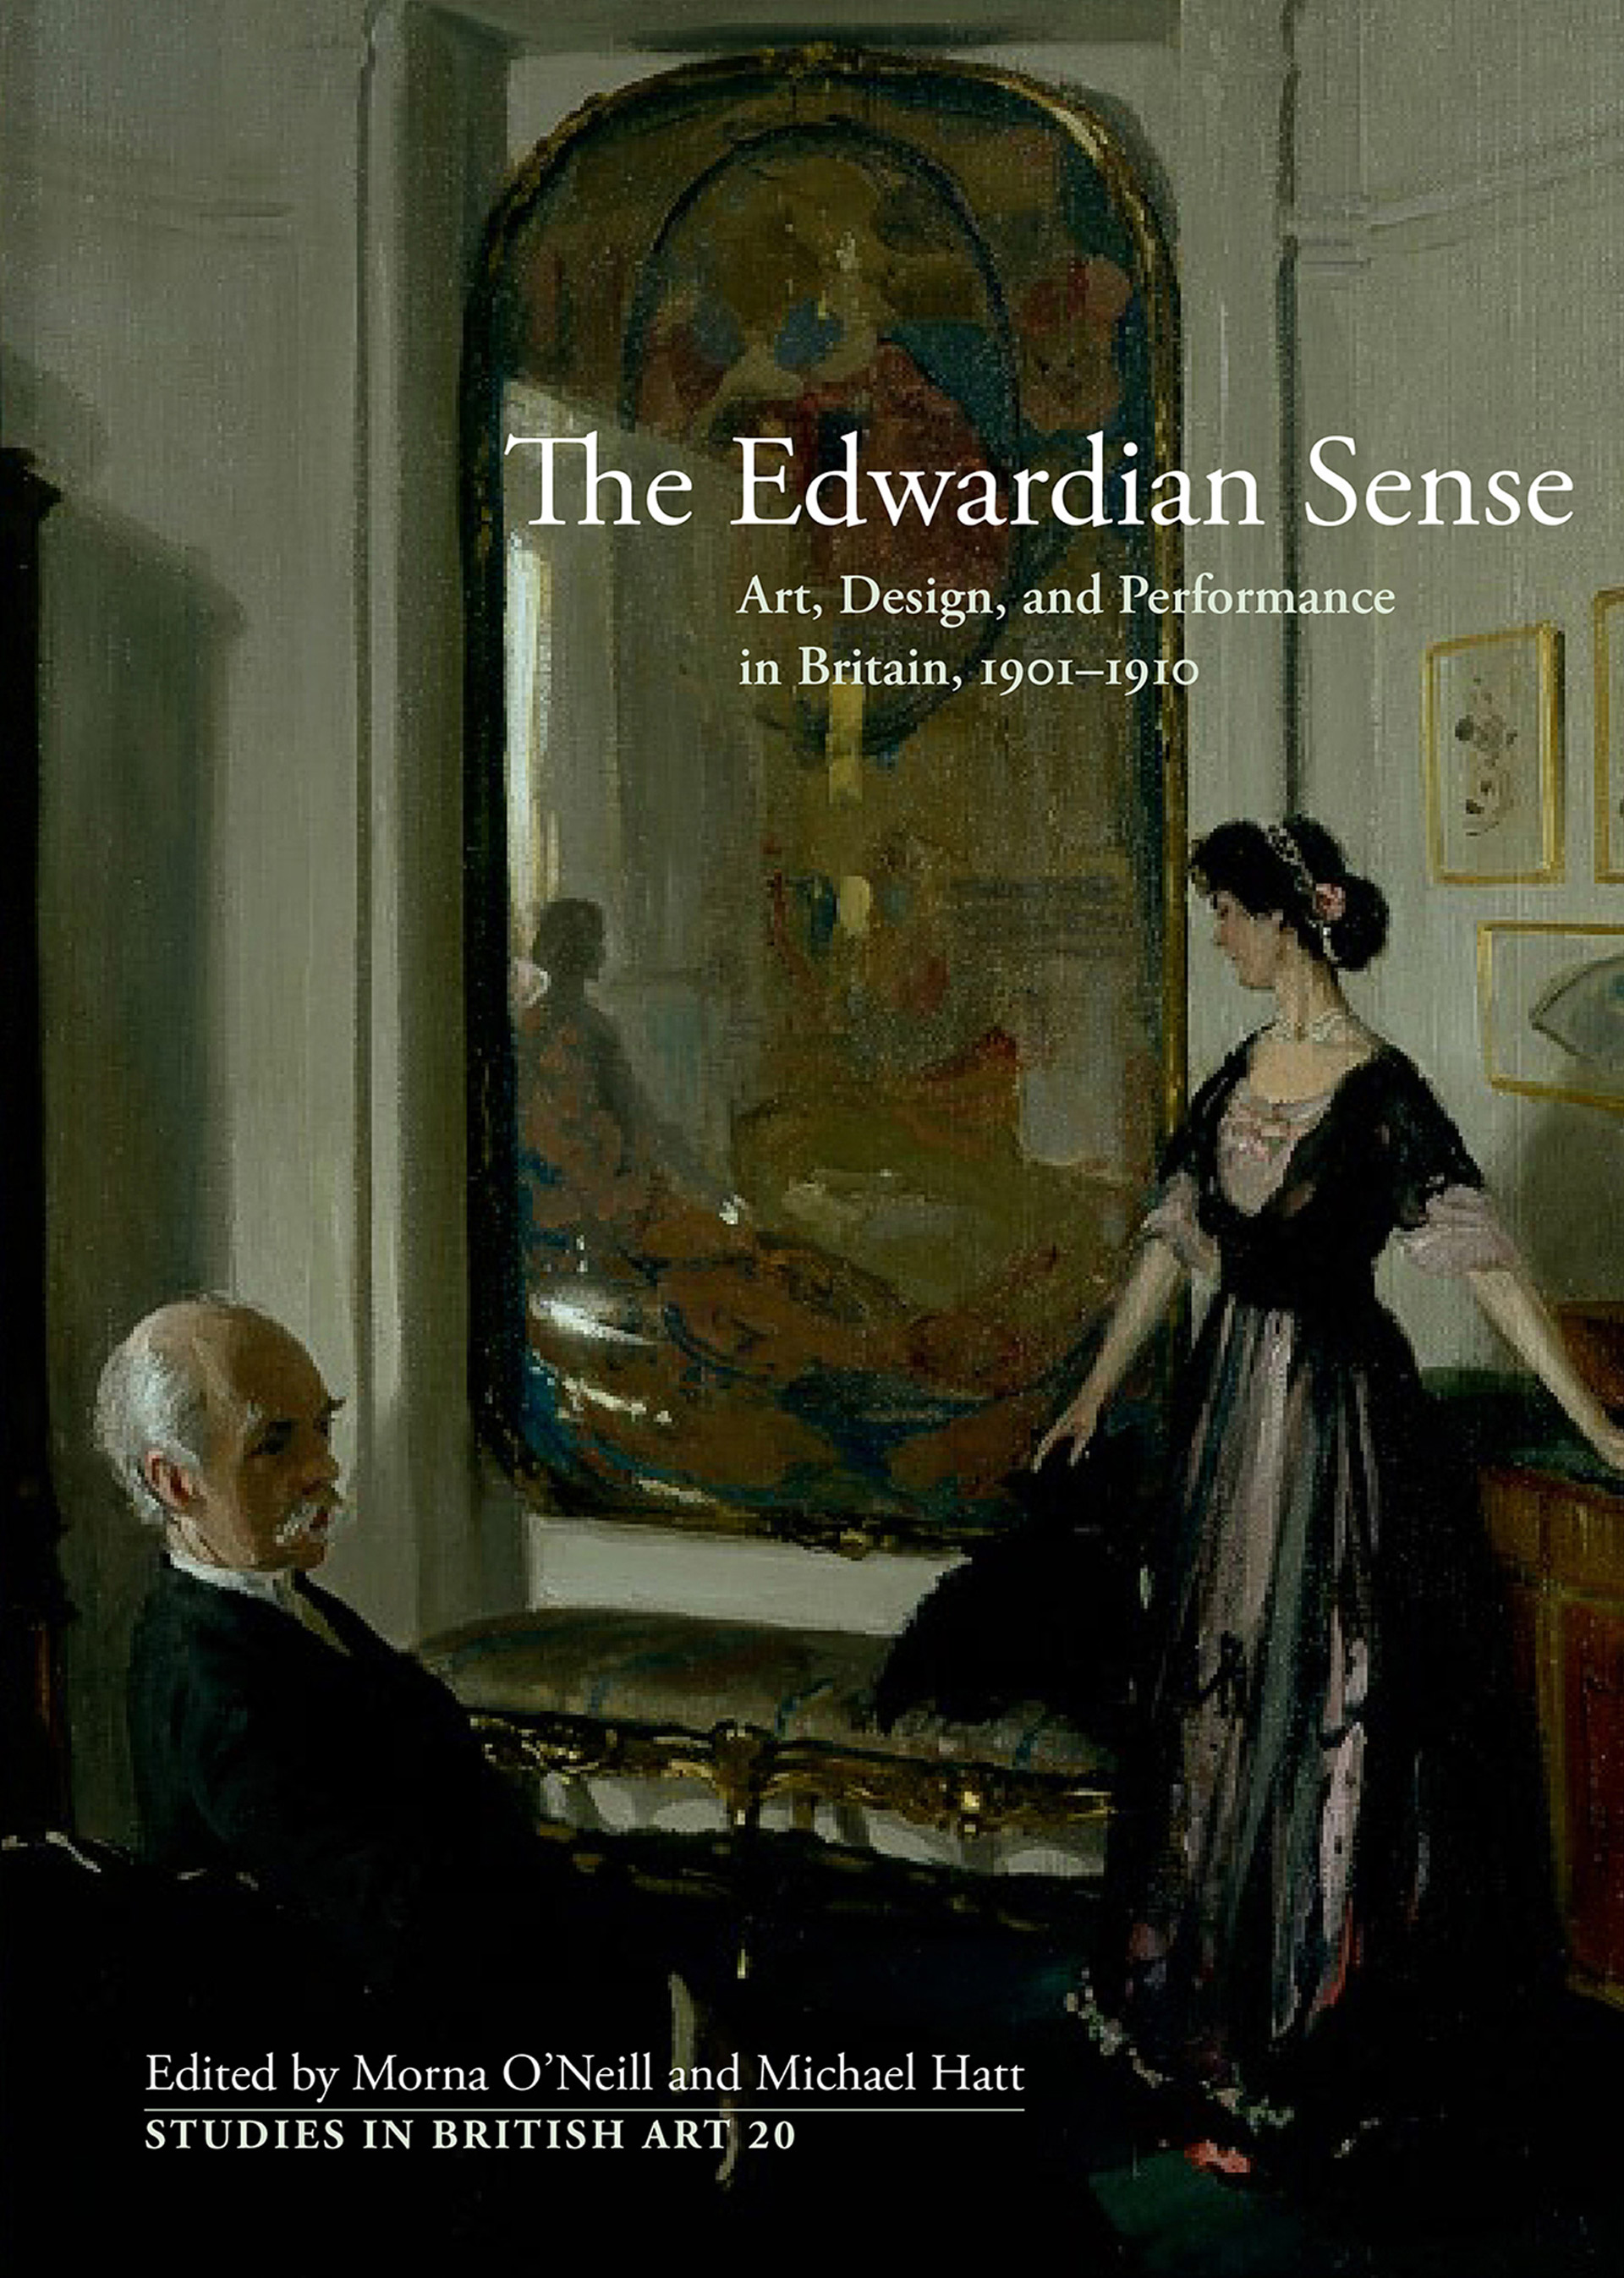 Cover, The Edwardian Sense: Art, Design, and Performance in Britain, 1901–1910